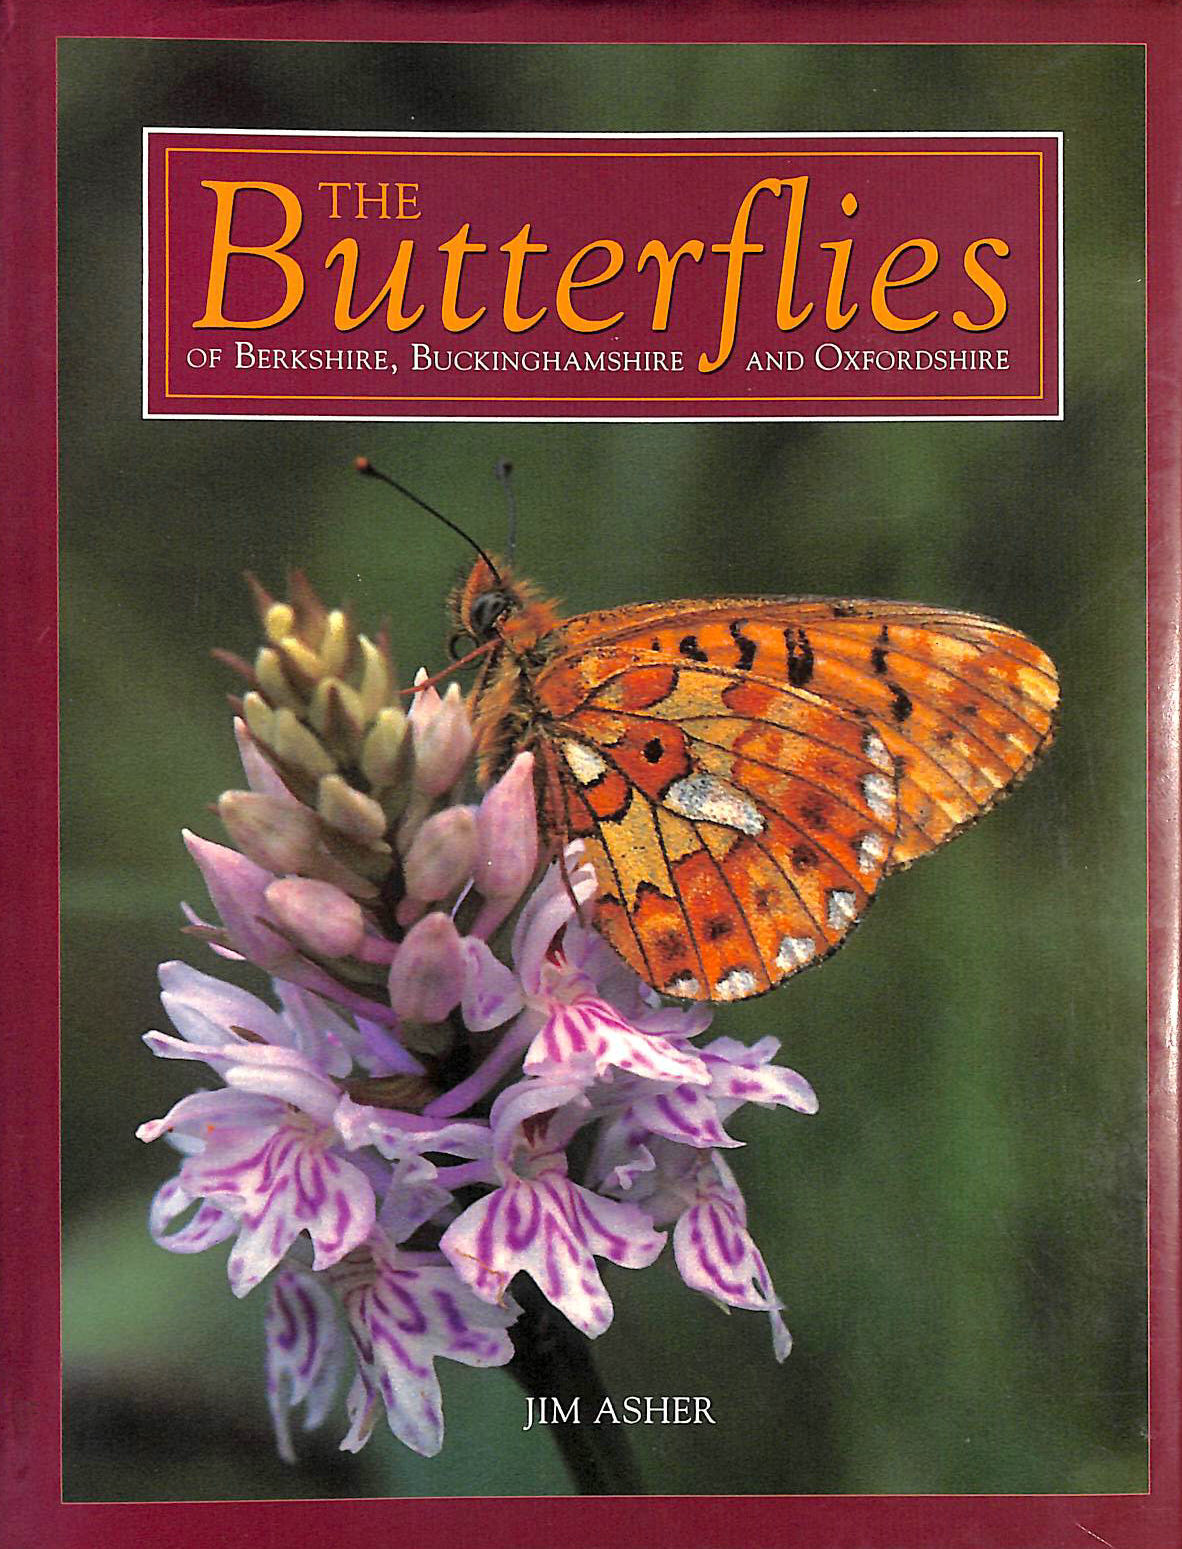 ASHER, JIM - The Butterflies of Berkshire, Buckinghamshire and Oxfordshire